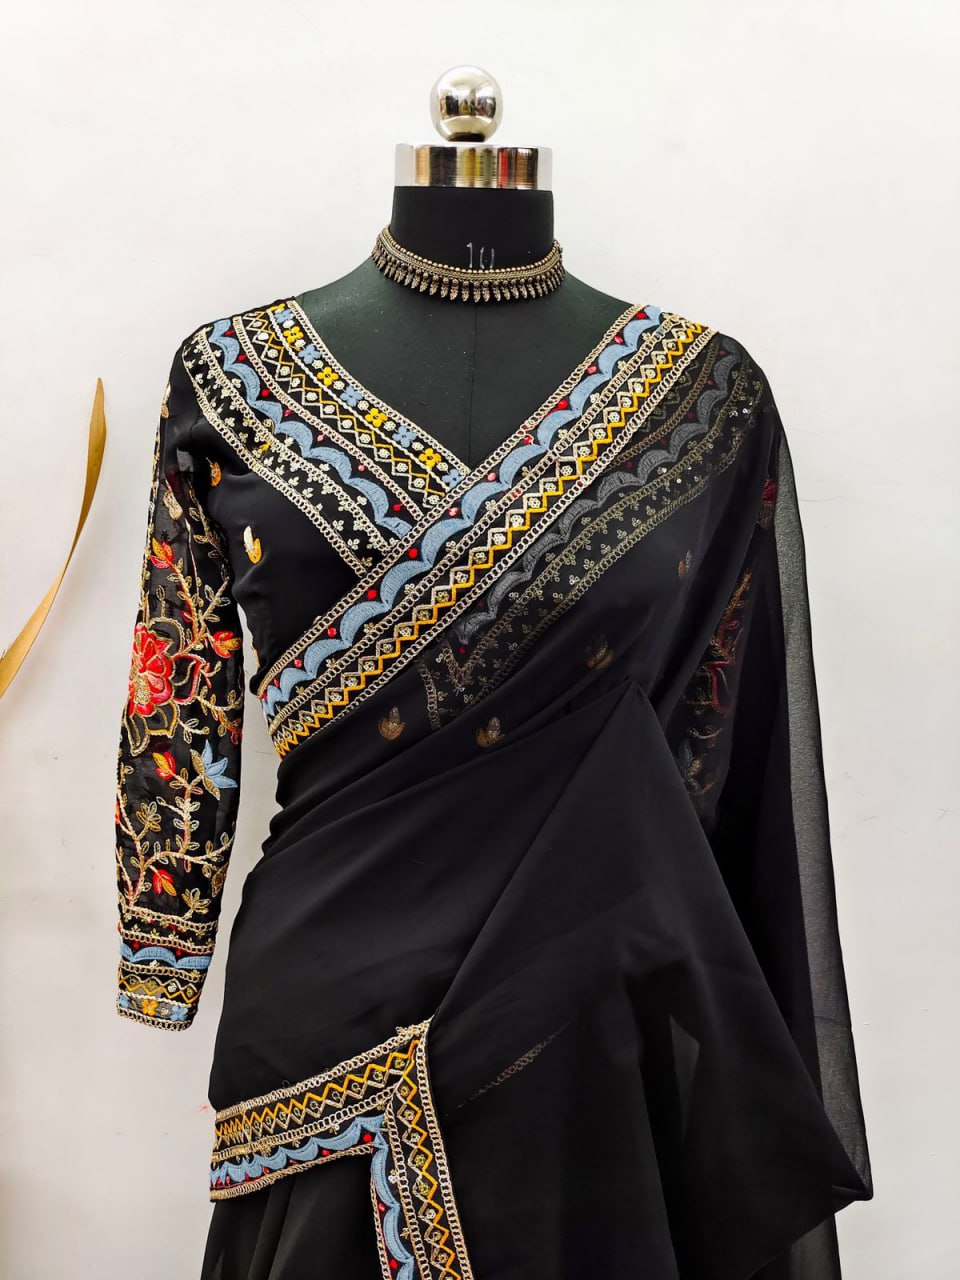 Buy Black Saree Online in India at low prices